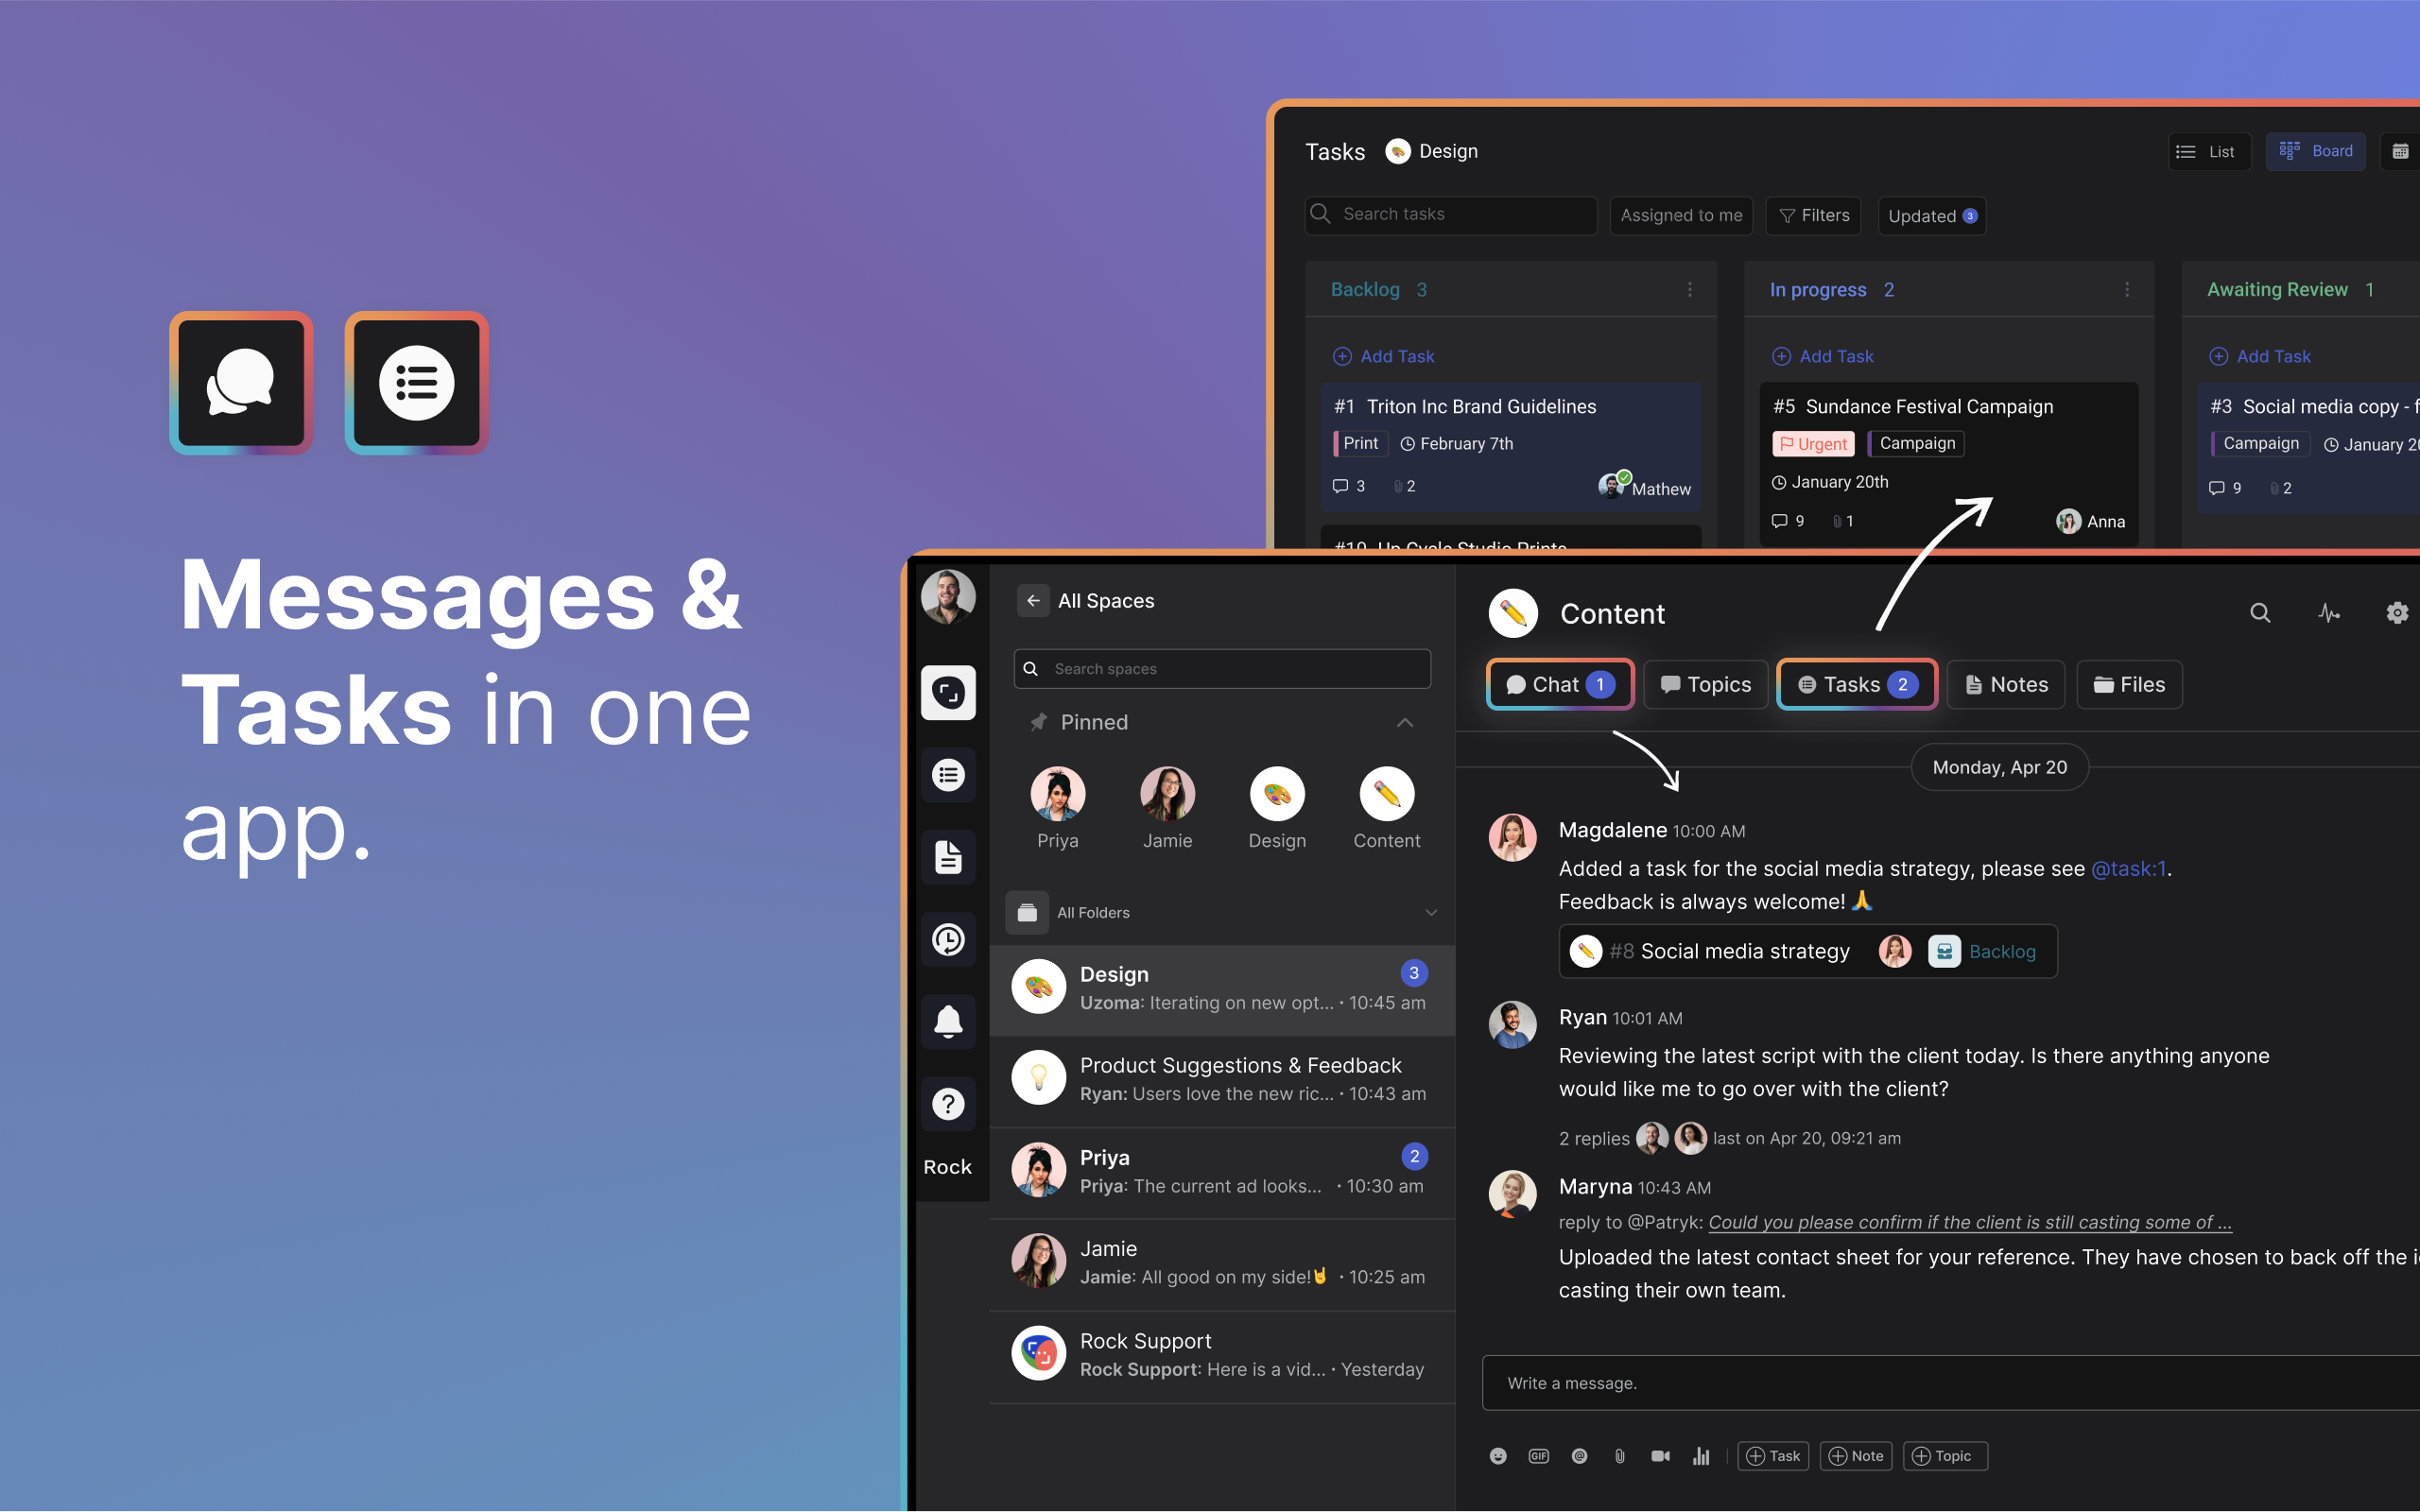 Natively built out messaging + tasks reduces app switching. Get work done in one place and use cross-functional features such as @mention tasks in the chat, convert messages into tasks or comments under tasks and so much more!